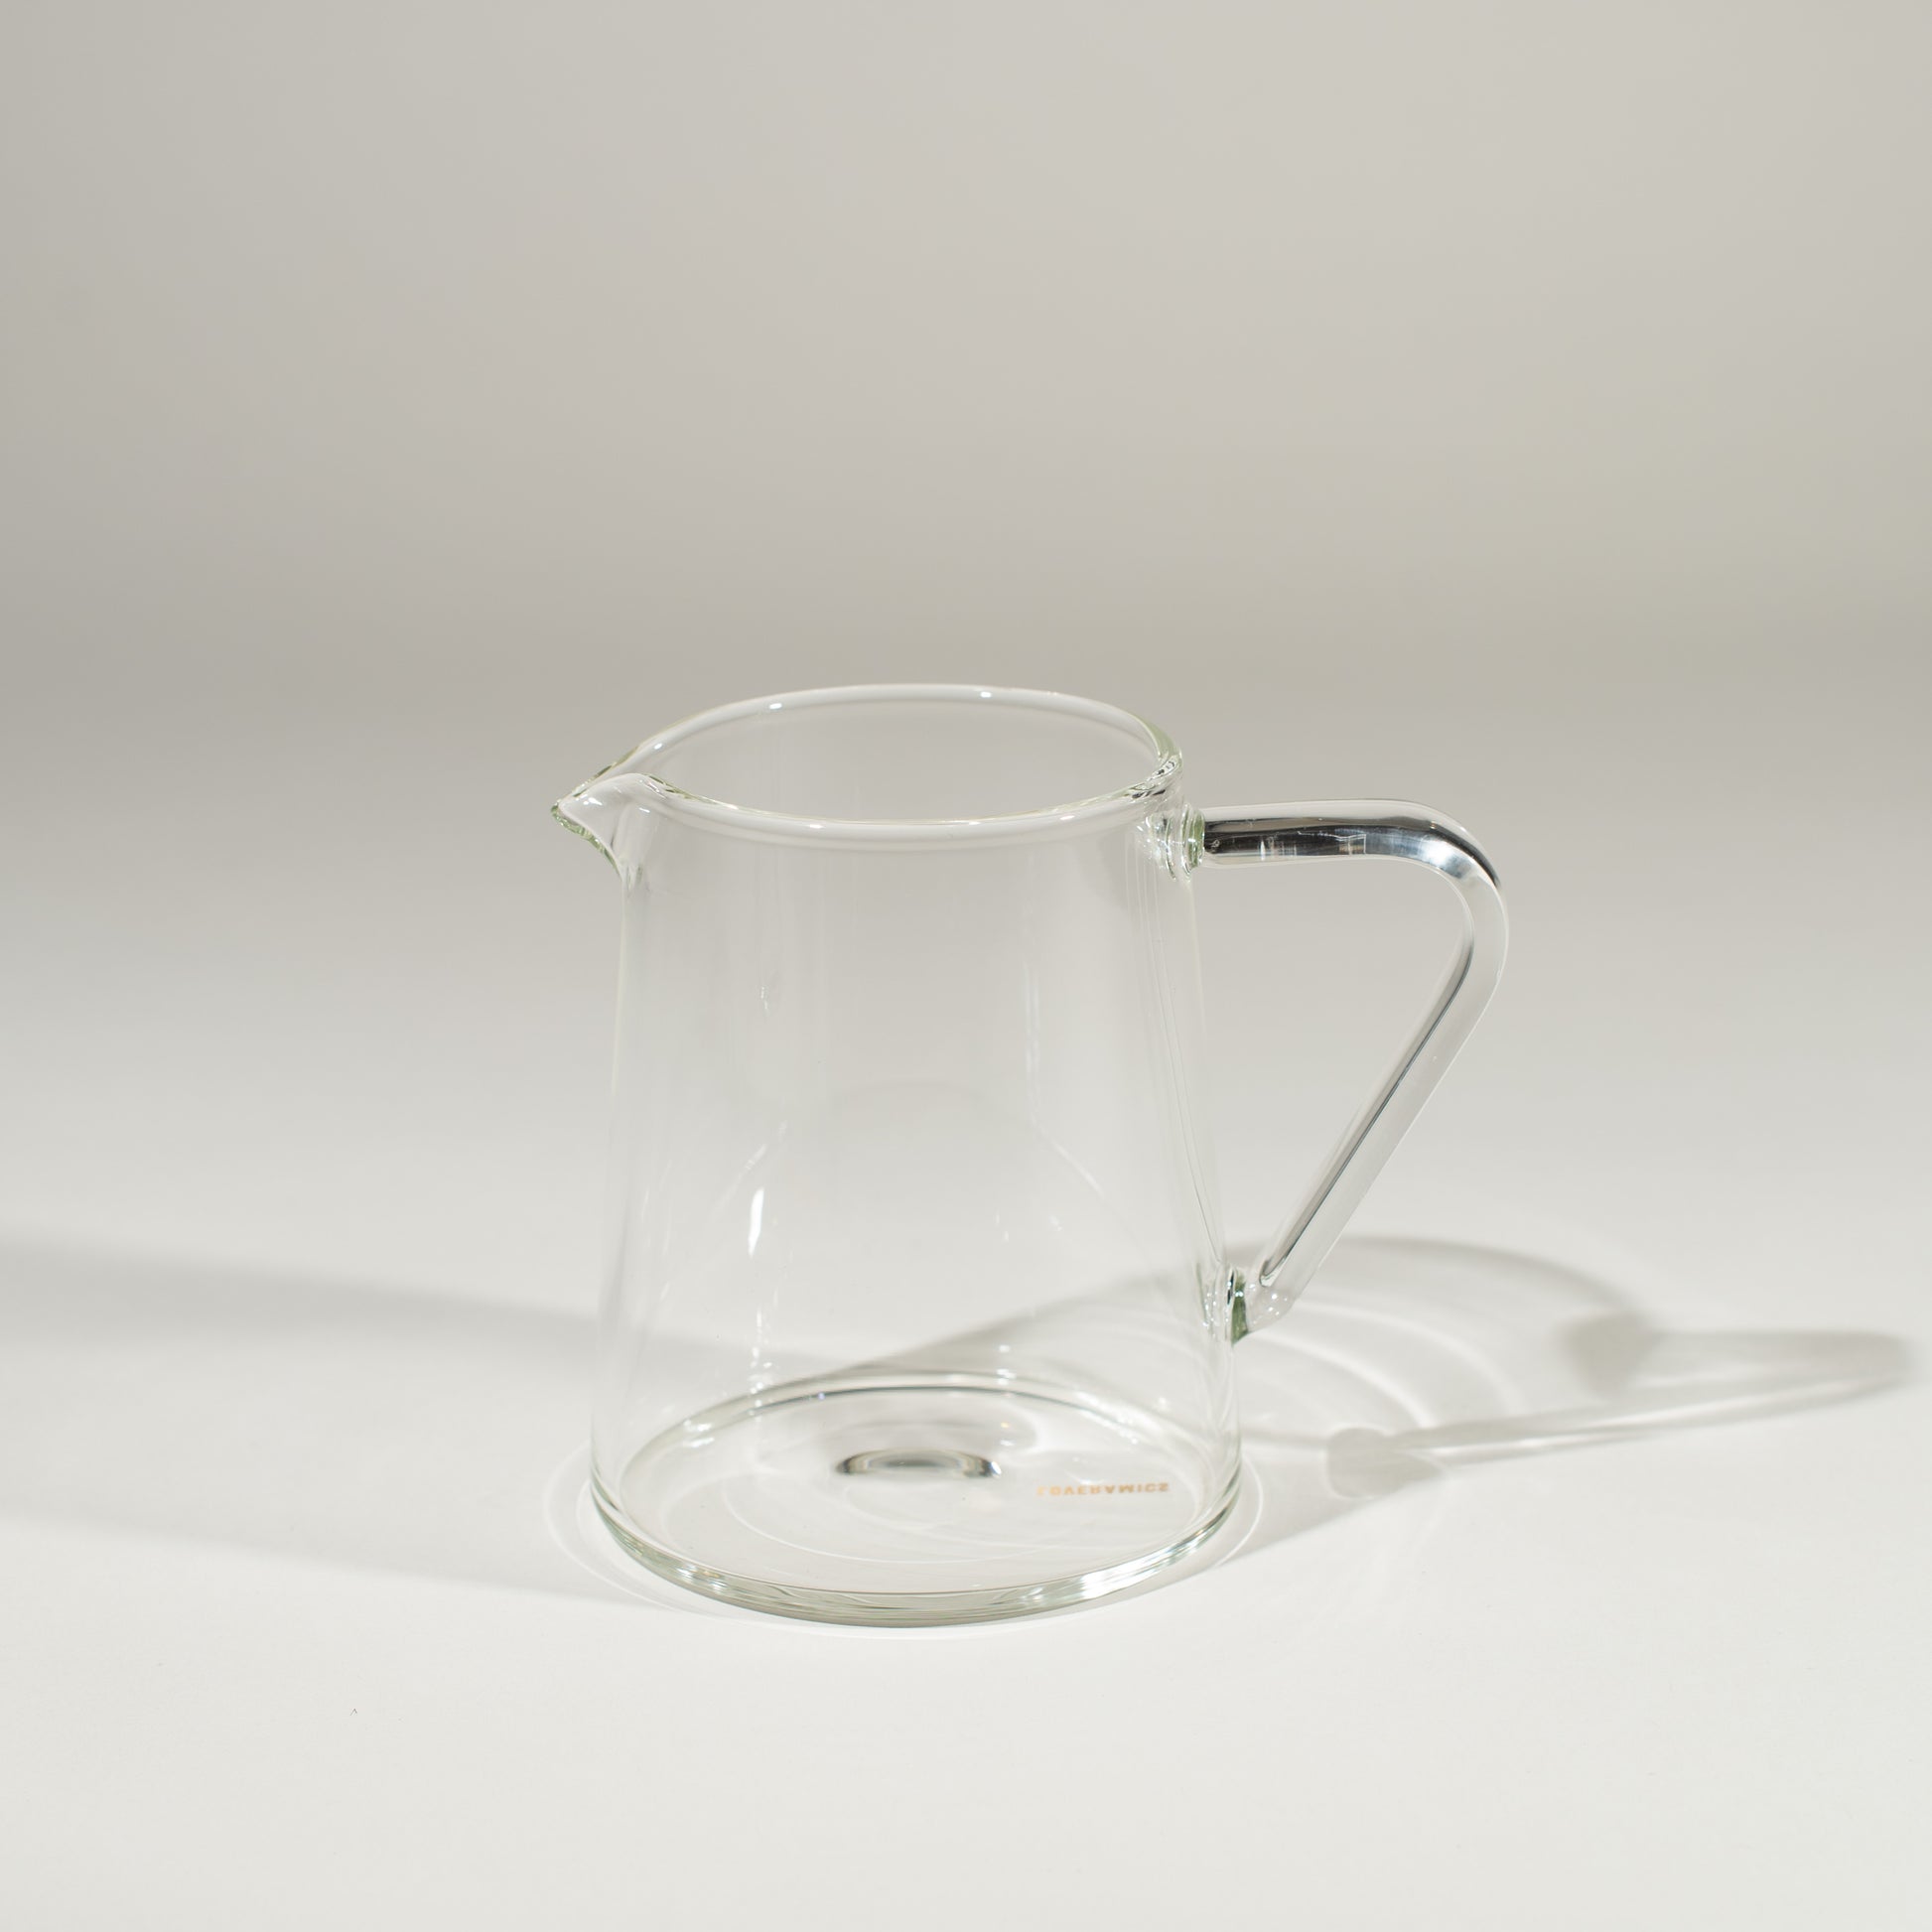 Glass is heat proof. Works with the Brewers Dripping Stand, or just the Drippers alone. Featured is carafe